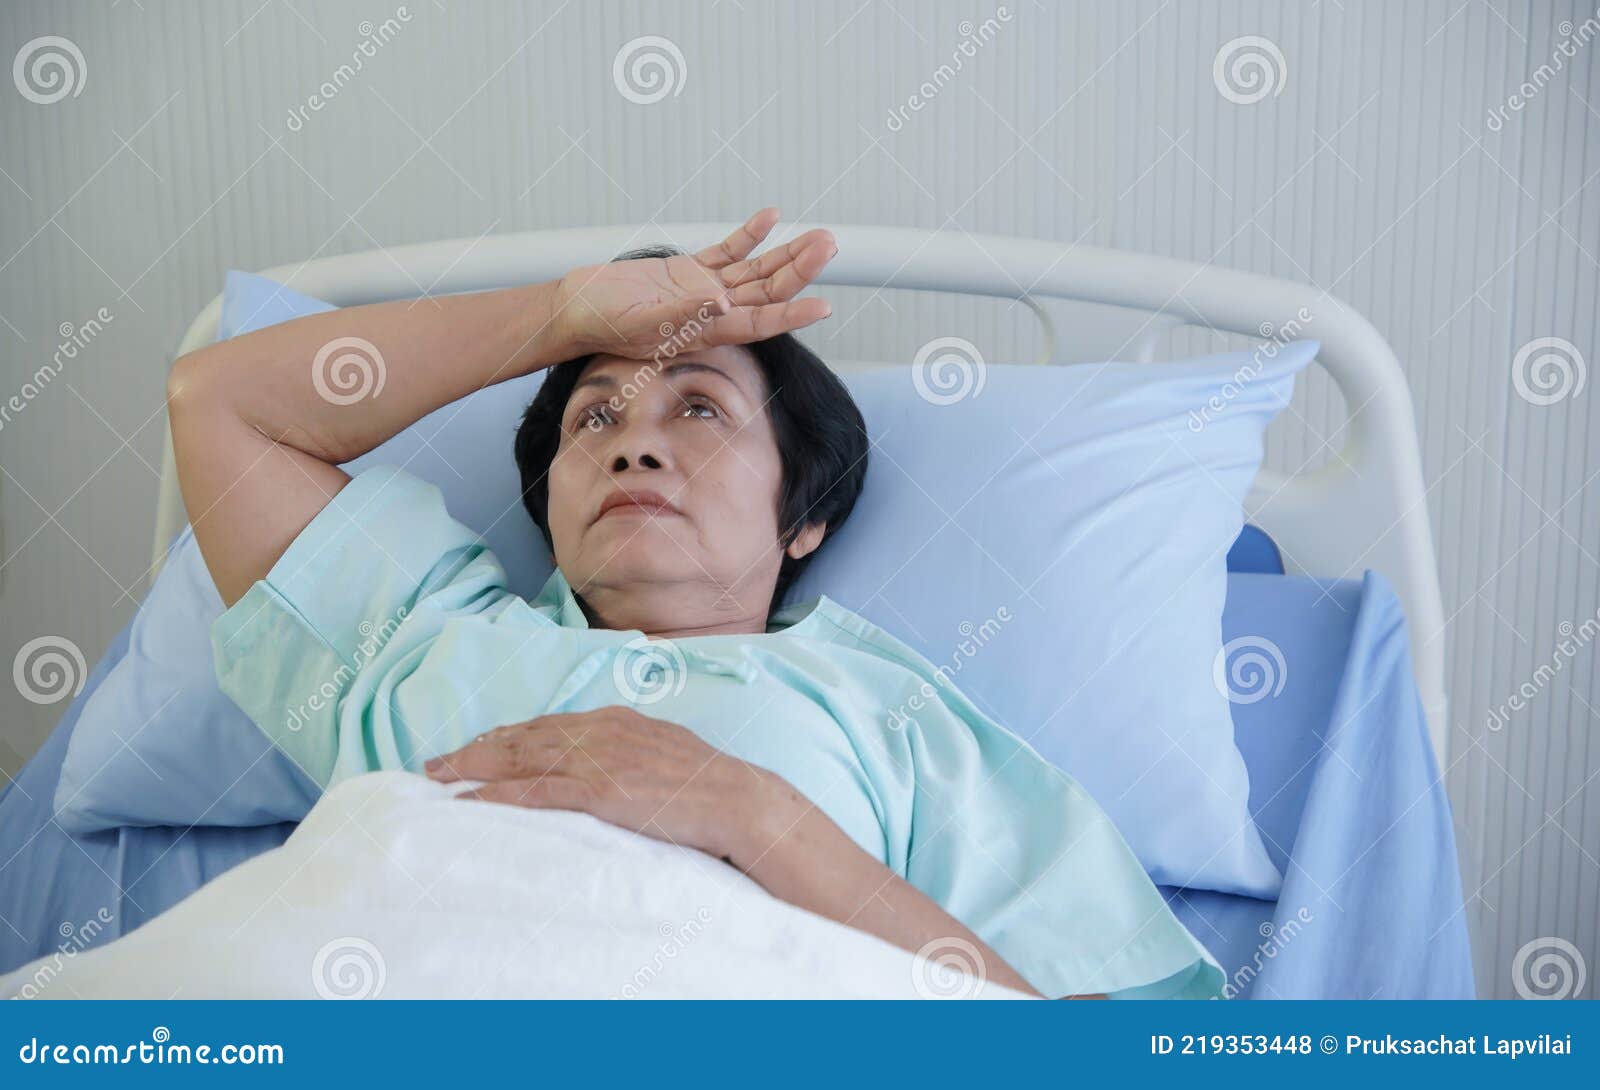 asian elderly woman putting her hand on her forehead with anxious and stress expression face at hospital bed